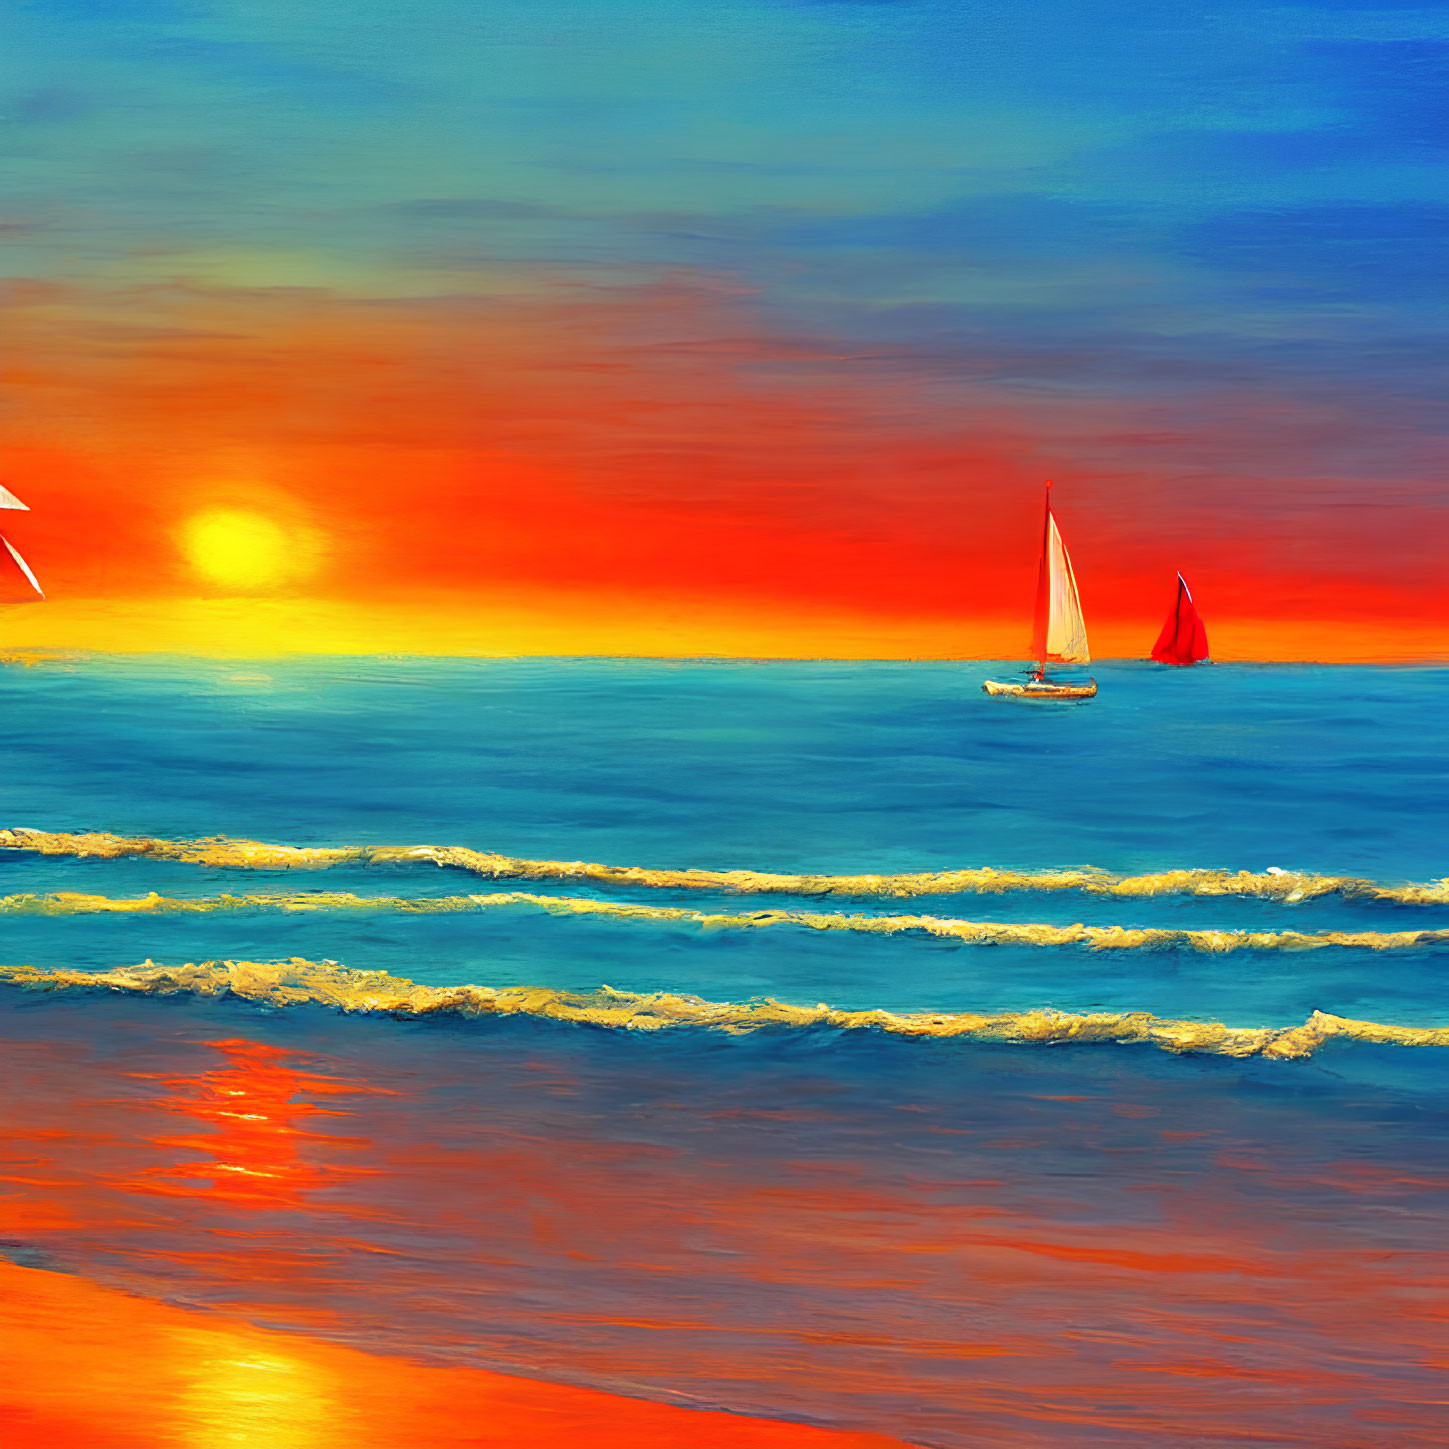 Vibrant Sunset Seascape with Colorful Sky and Sailboats